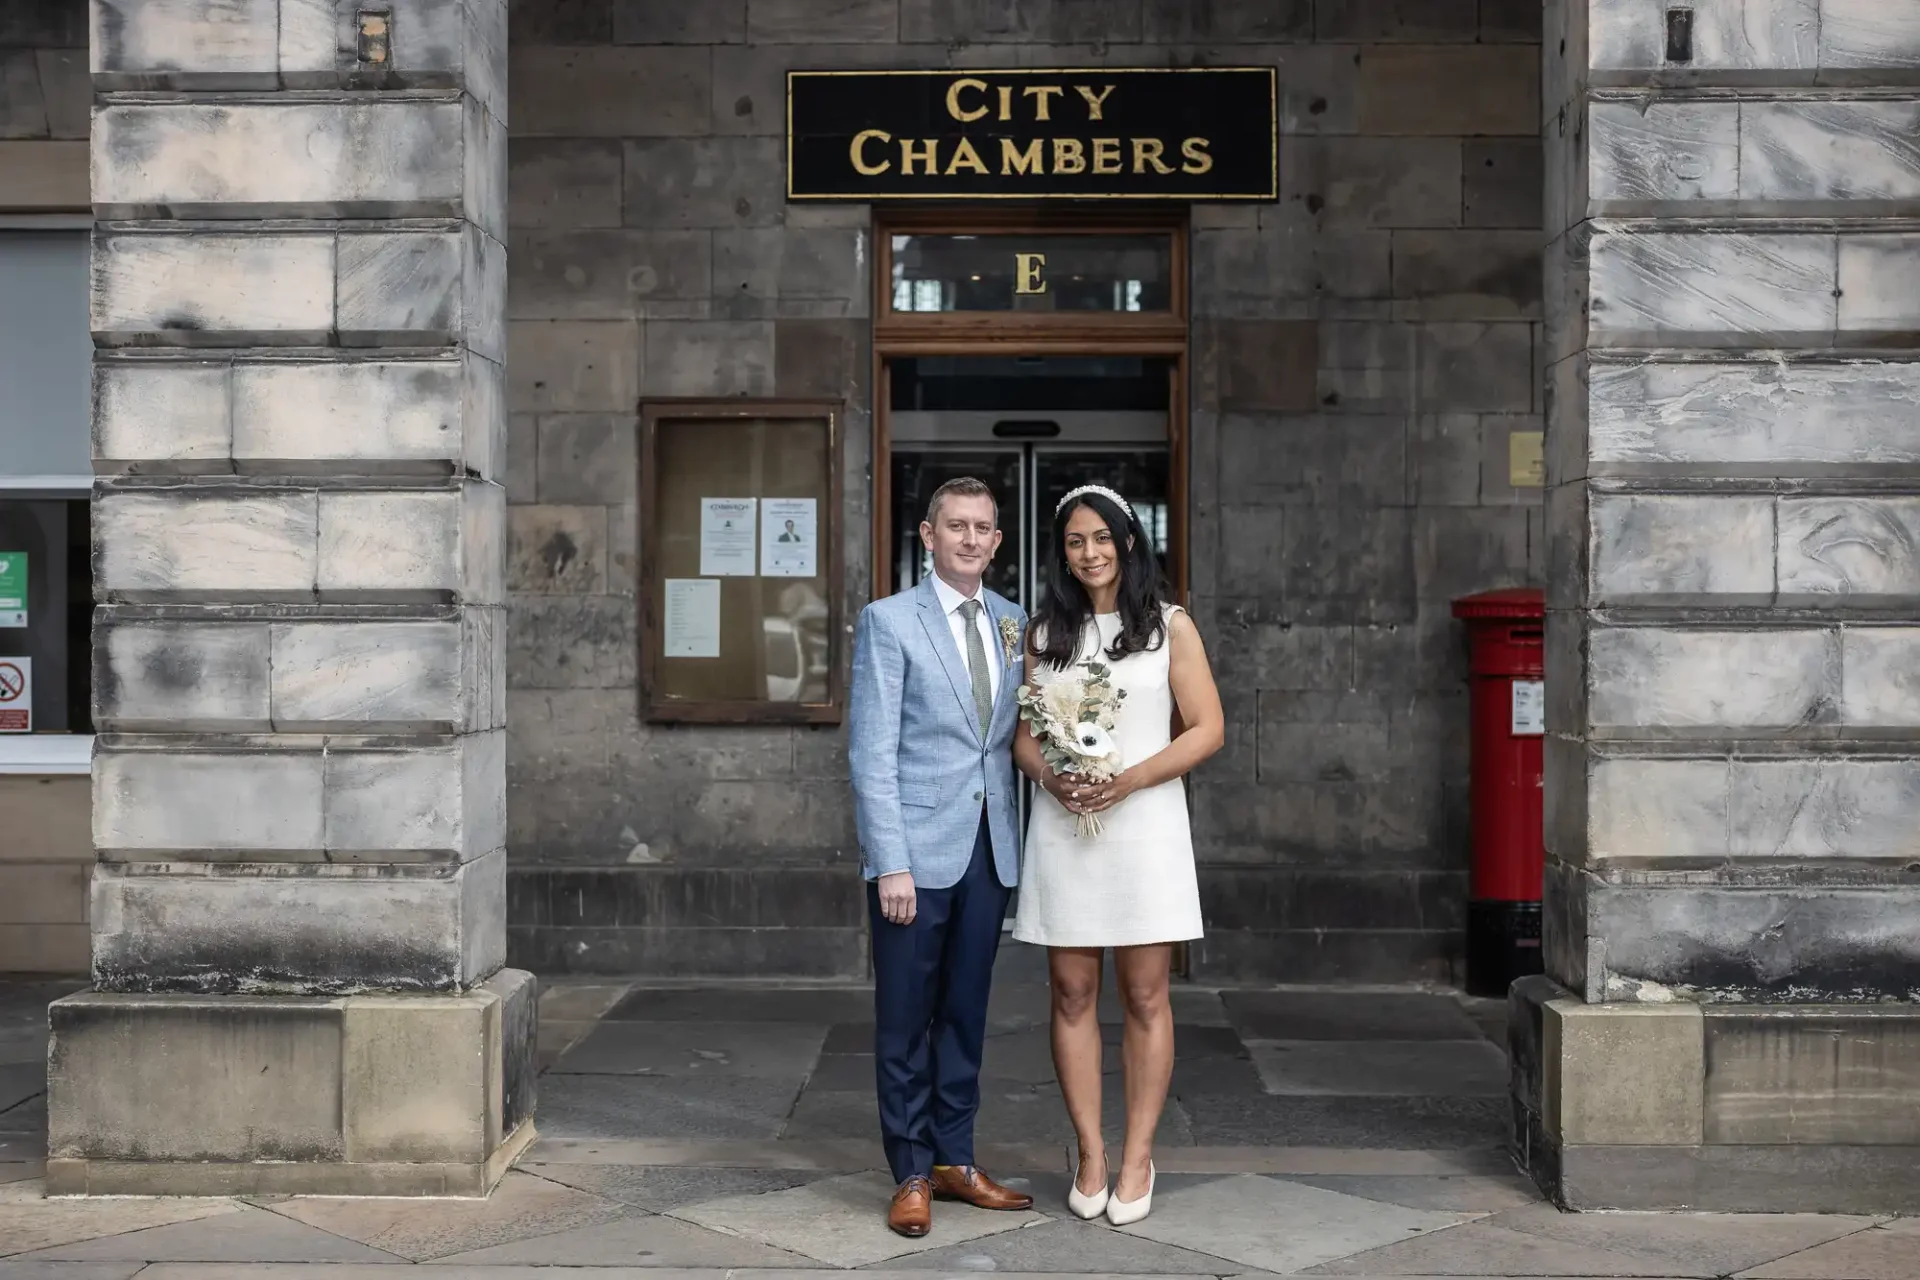 wedding photographer Edinburgh City Chambers - a couple, dressed formally, stands in front of the City Chambers building entrance, with the woman holding a bouquet of flowers.